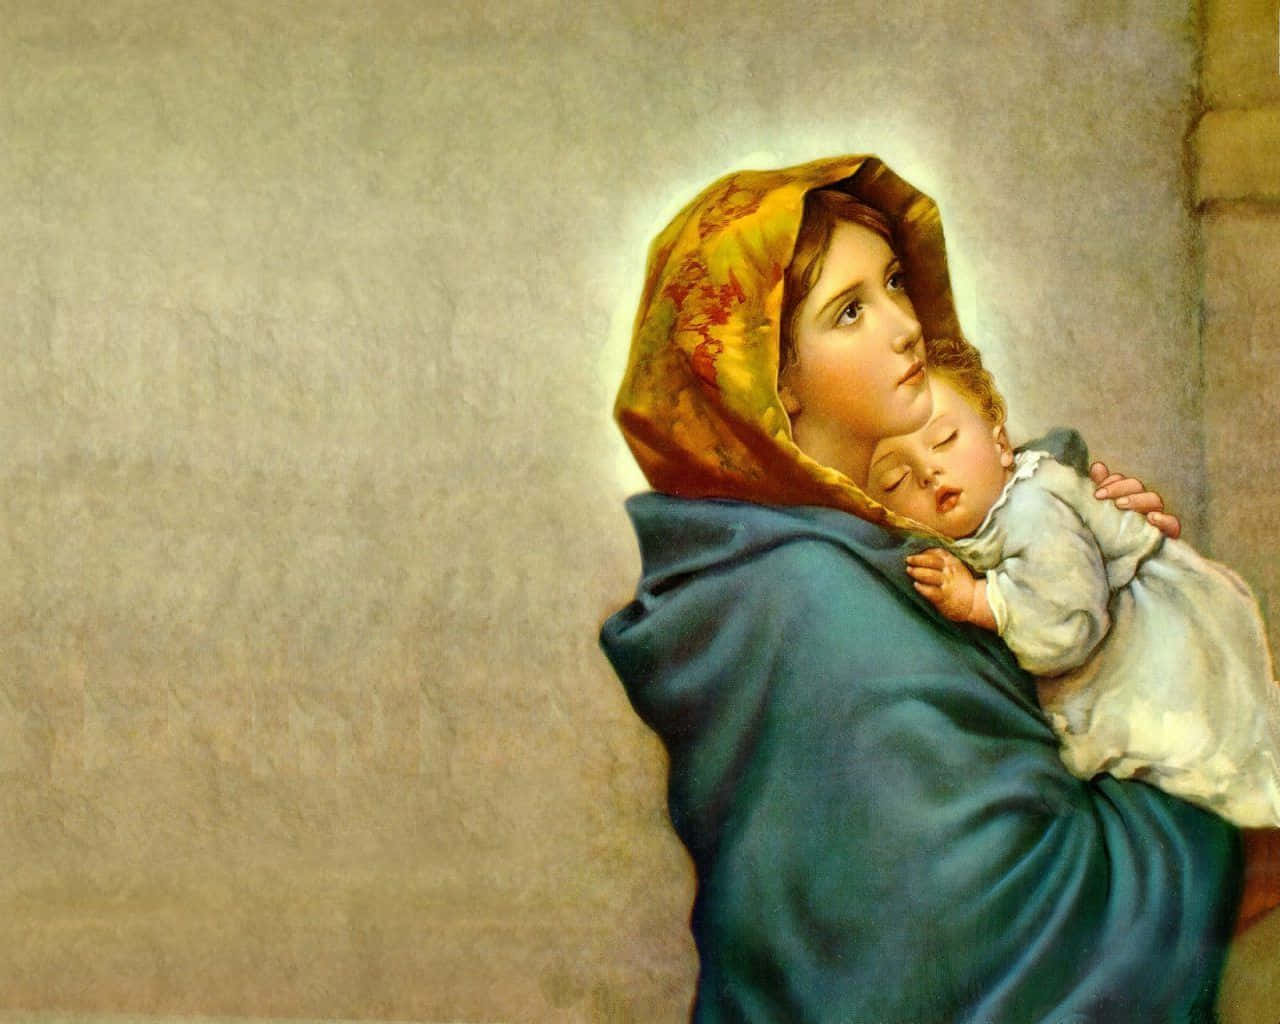 Virgin Mary venerated and honored by Catholics around the world Wallpaper